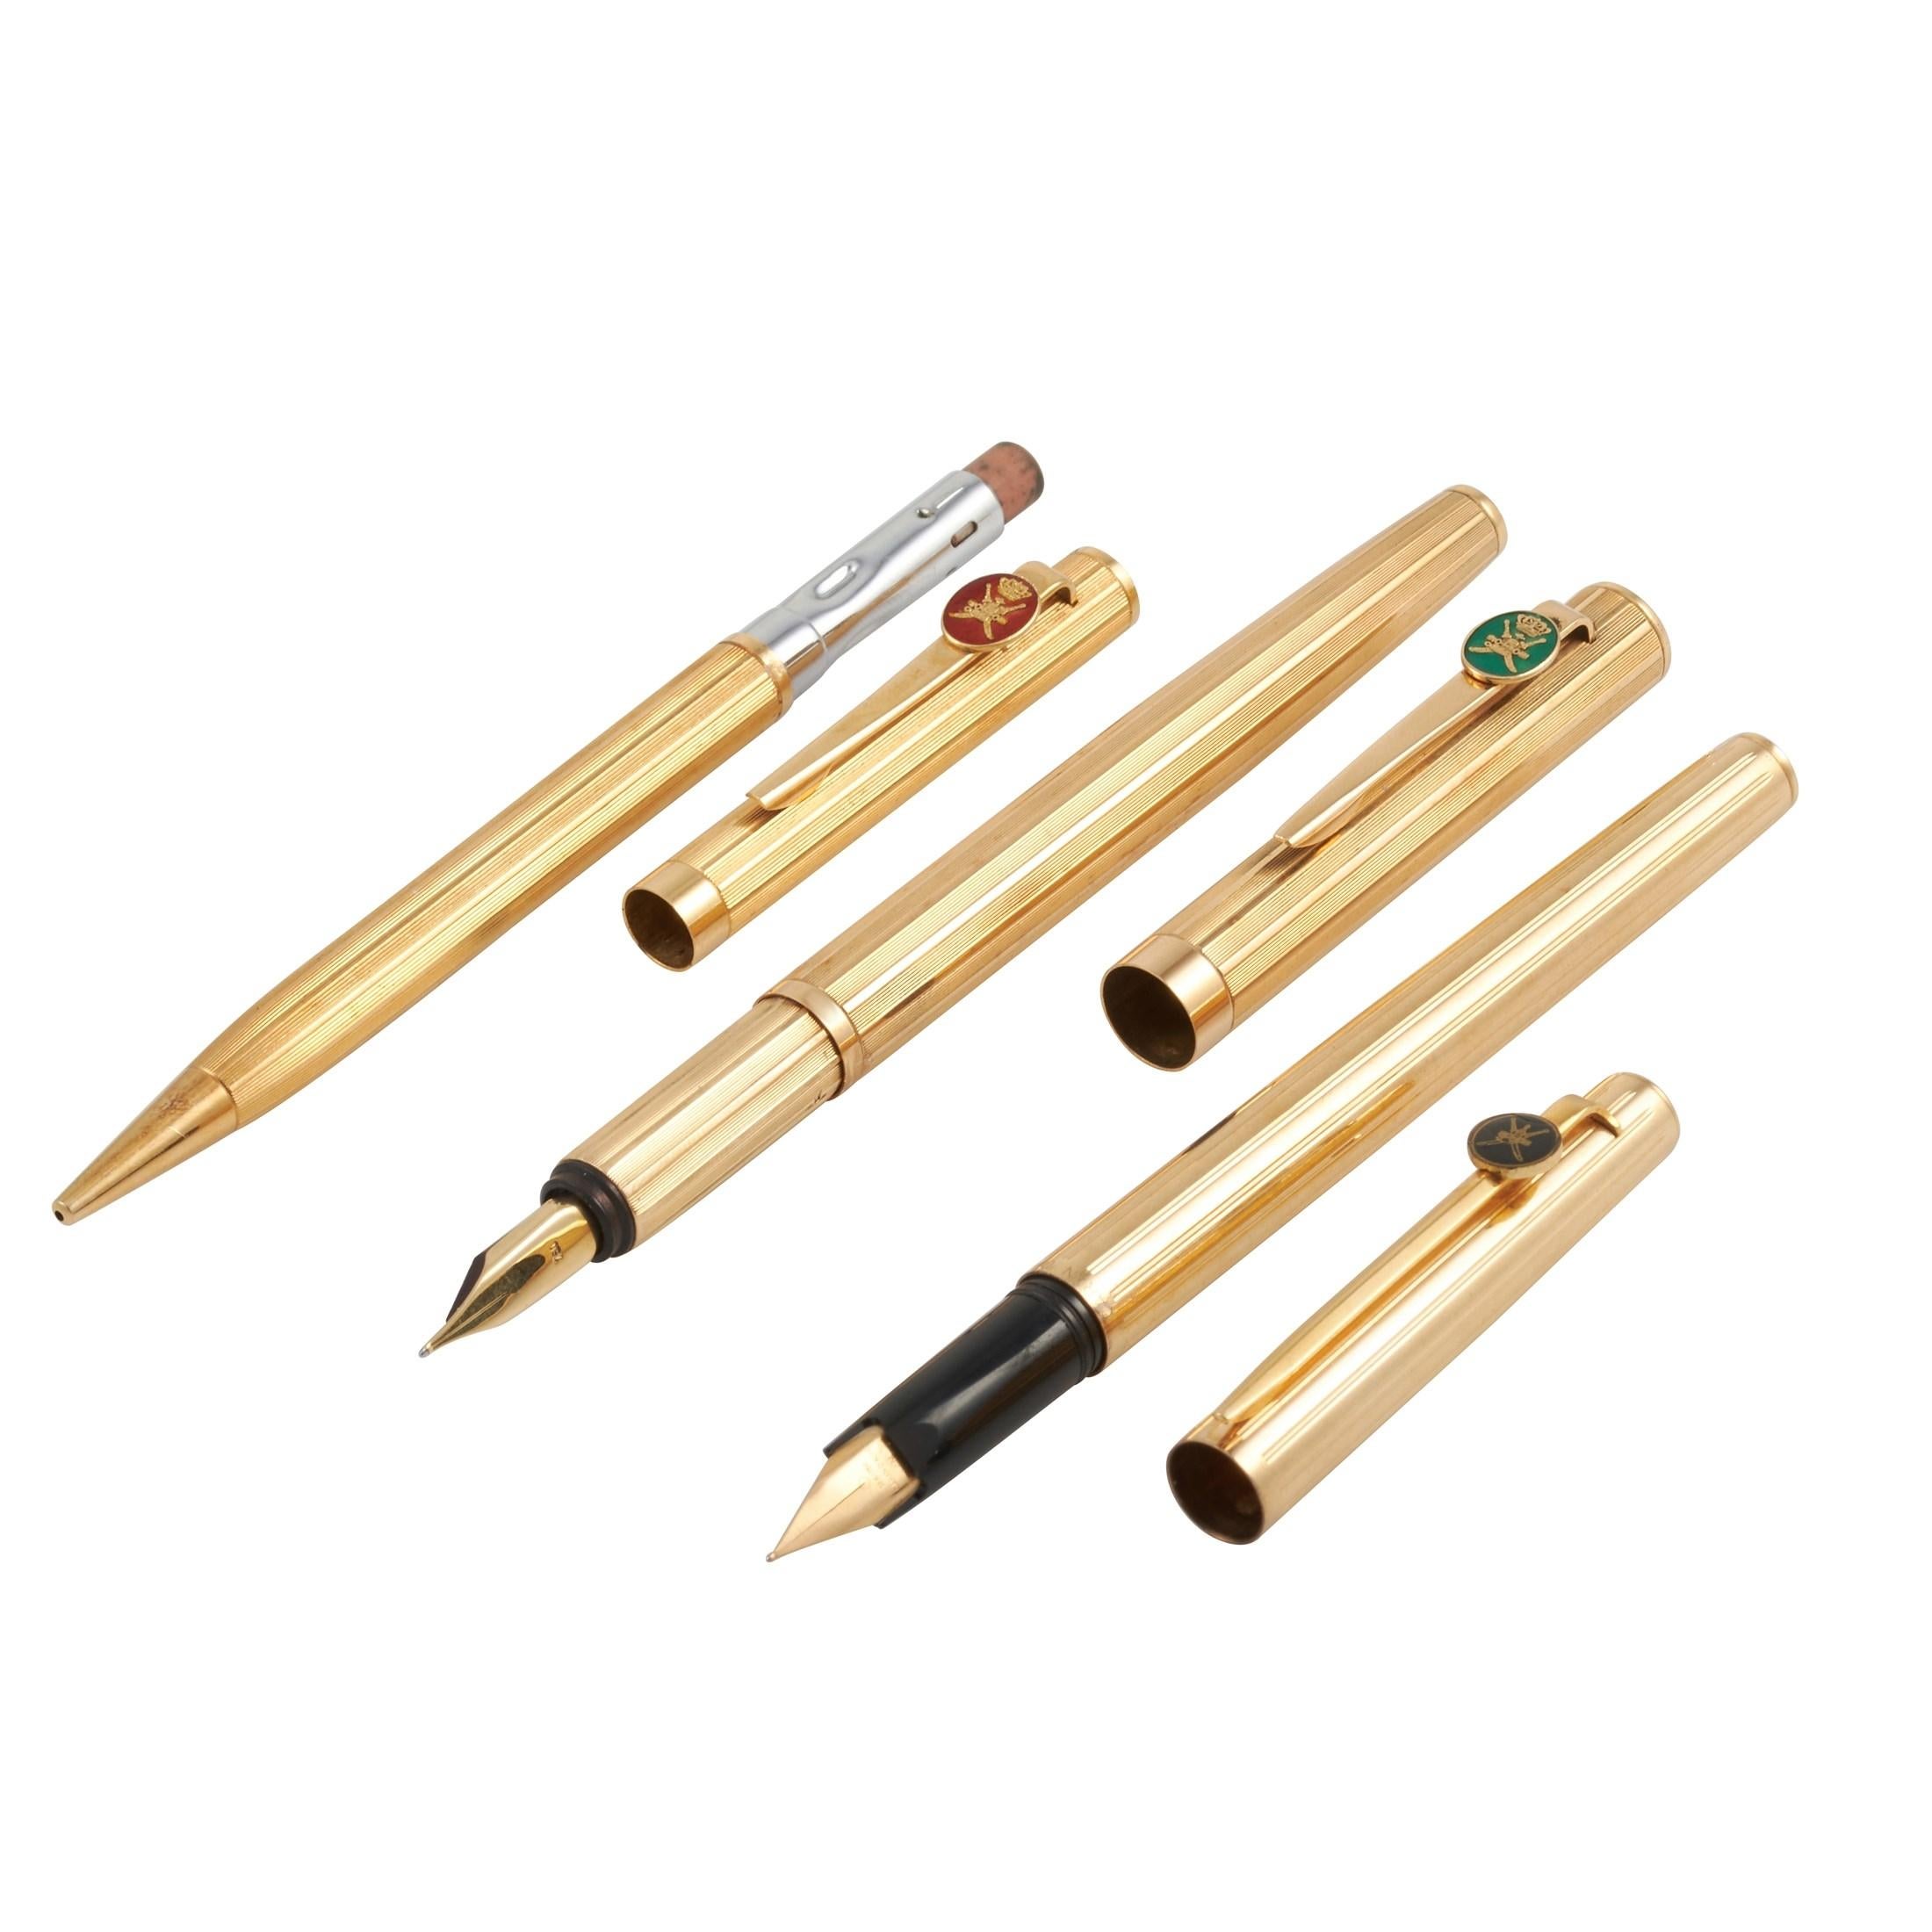 This set of three 18K yellow gold pens were made by Royama, and gifted by Sultan of Oman. Each pen features the Khanjar, the national emblem of Oman, in different colored enamel on the pen clip. One in red, one in green, and one in black. Two of the